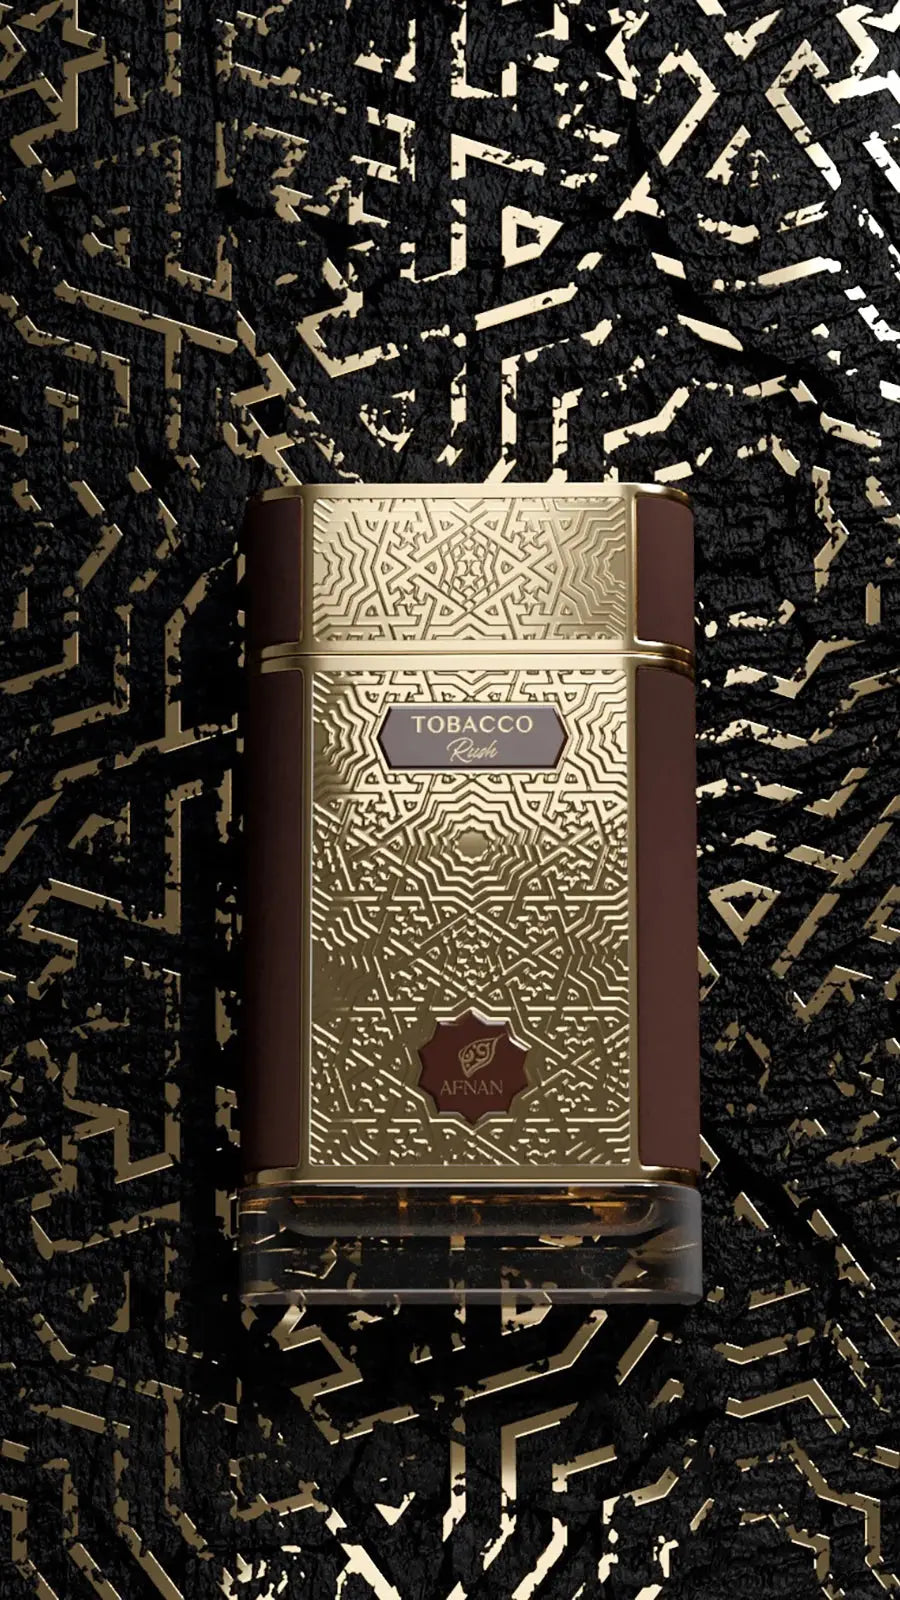 The image features a perfume bottle of "Tobacco Rush" by Afnan Perfumes. The background is an artistic, abstract design in black with gold accents, resembling fragmented calligraphy or a shattered gold leaf effect. The bottle is in the center with a square base, transitioning to a slightly narrower top. It has a rich, brown color with golden geometric patterns and the word "TOBACCO" prominently displayed in the center with "Rush" just below in a smaller font. 